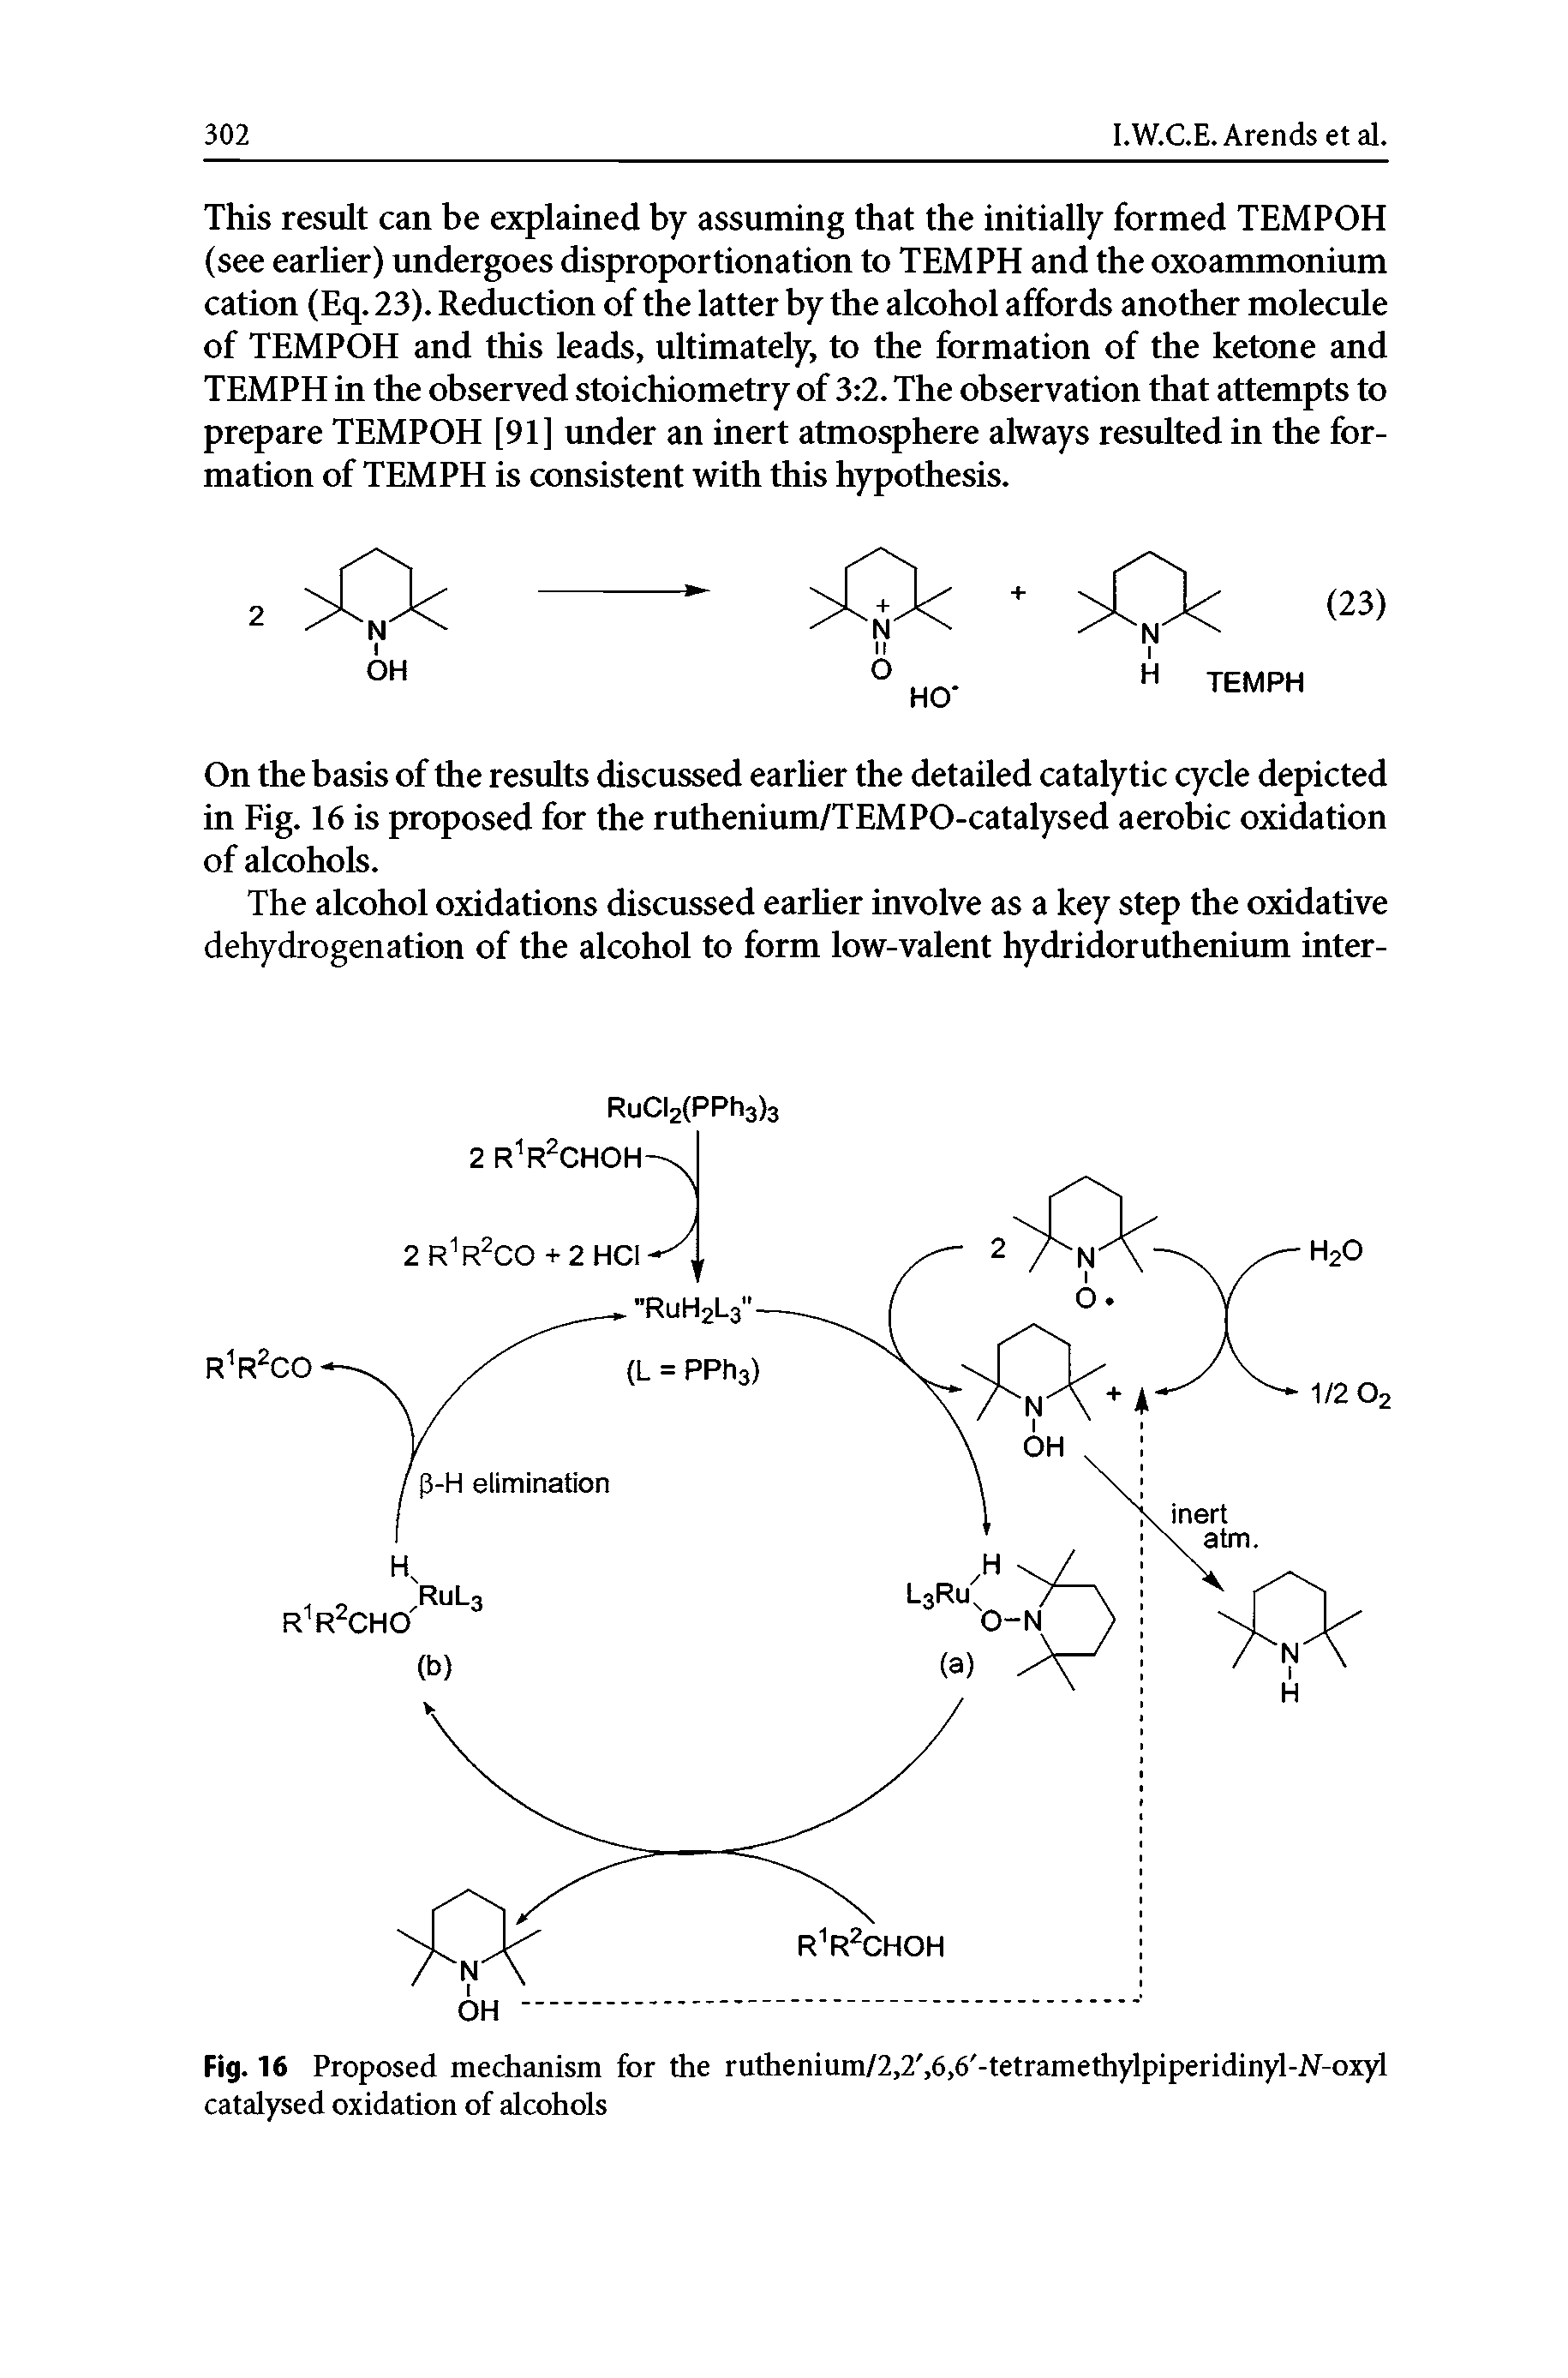 Fig. 16 Proposed mechanism for the ruthenium/2,2, 6,6 -tetramethylpiperidinyl-.N-oxyl catalysed oxidation of alcohols...